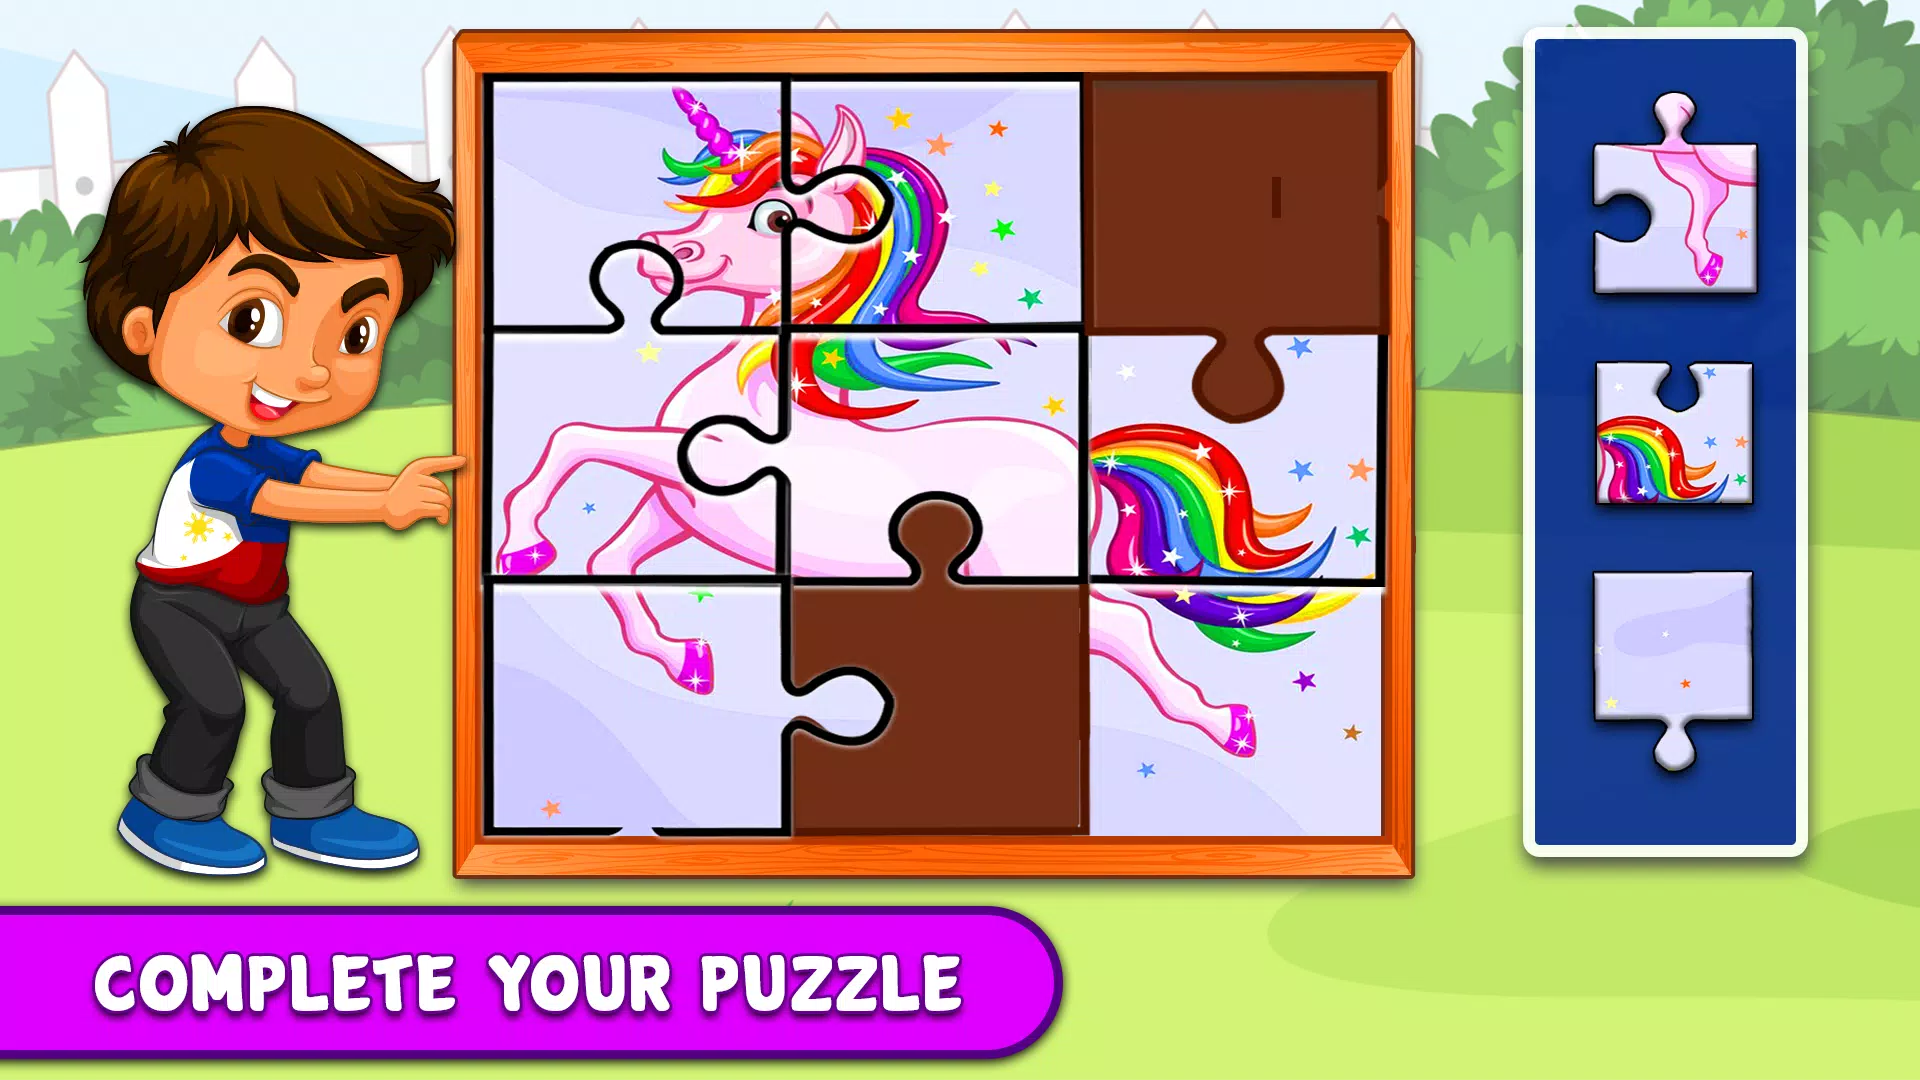 Online Puzzle Games For Kids To Pass The Time